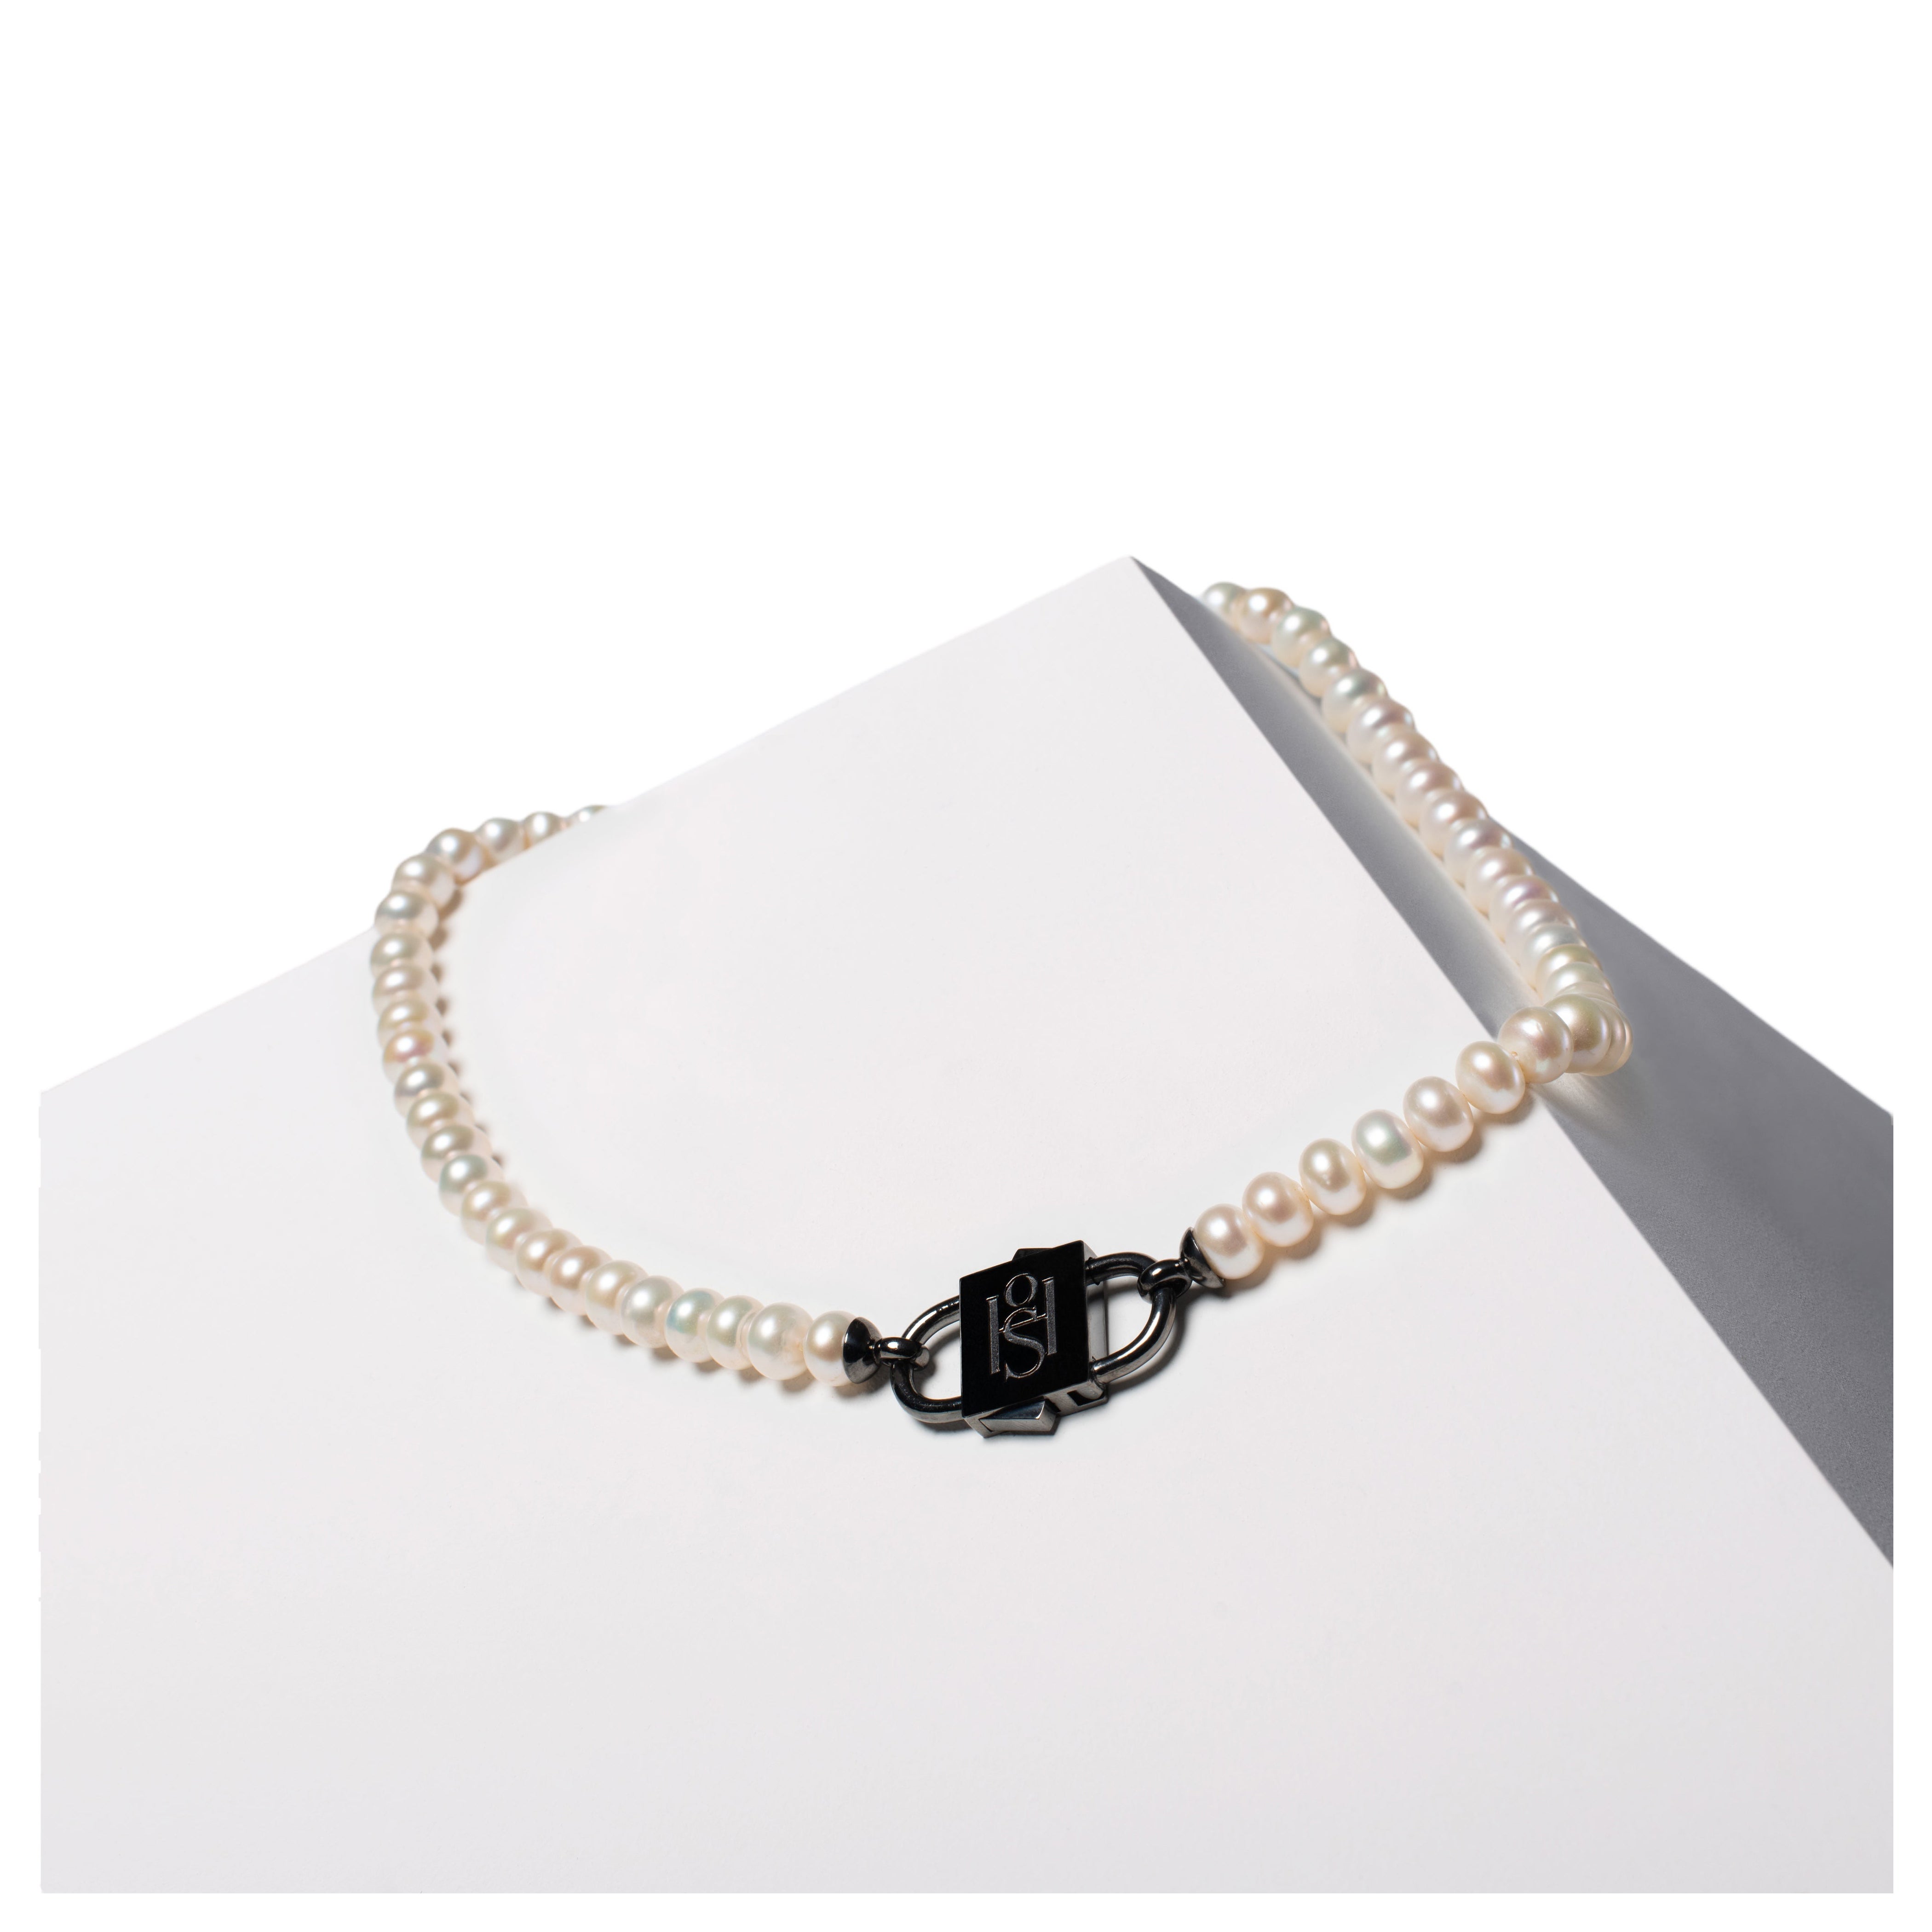 House of Sol Pearl Necklace with 24K Rhodium Filled HoS Lock